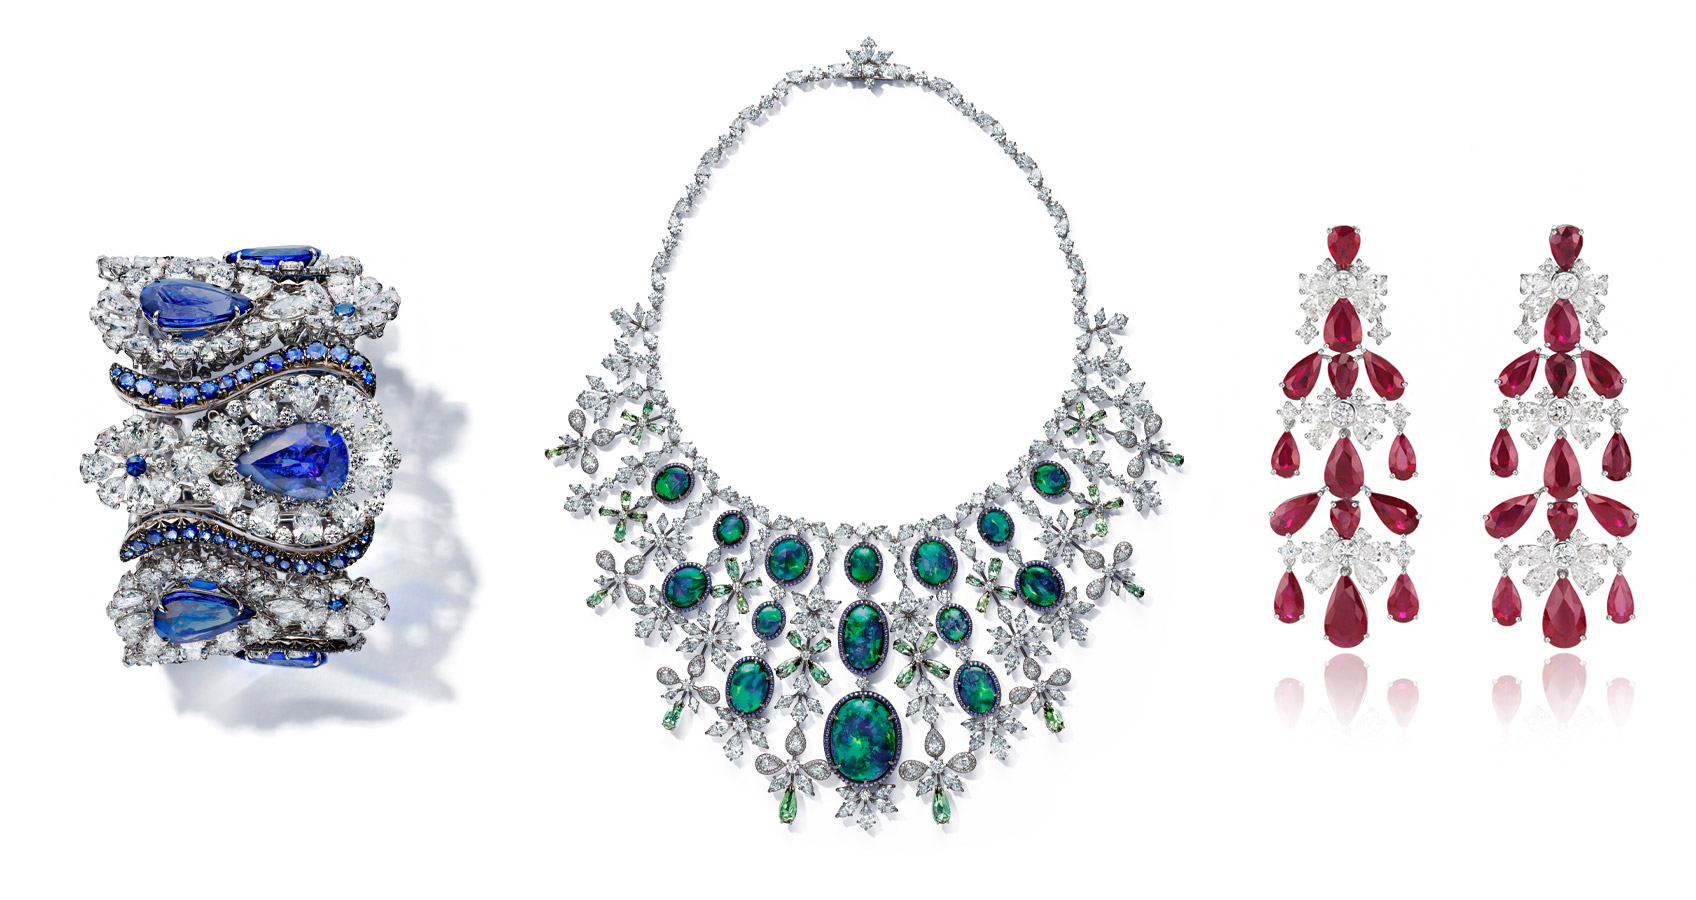 Chopard celebrates ten years of its Red Carpet collection with 70